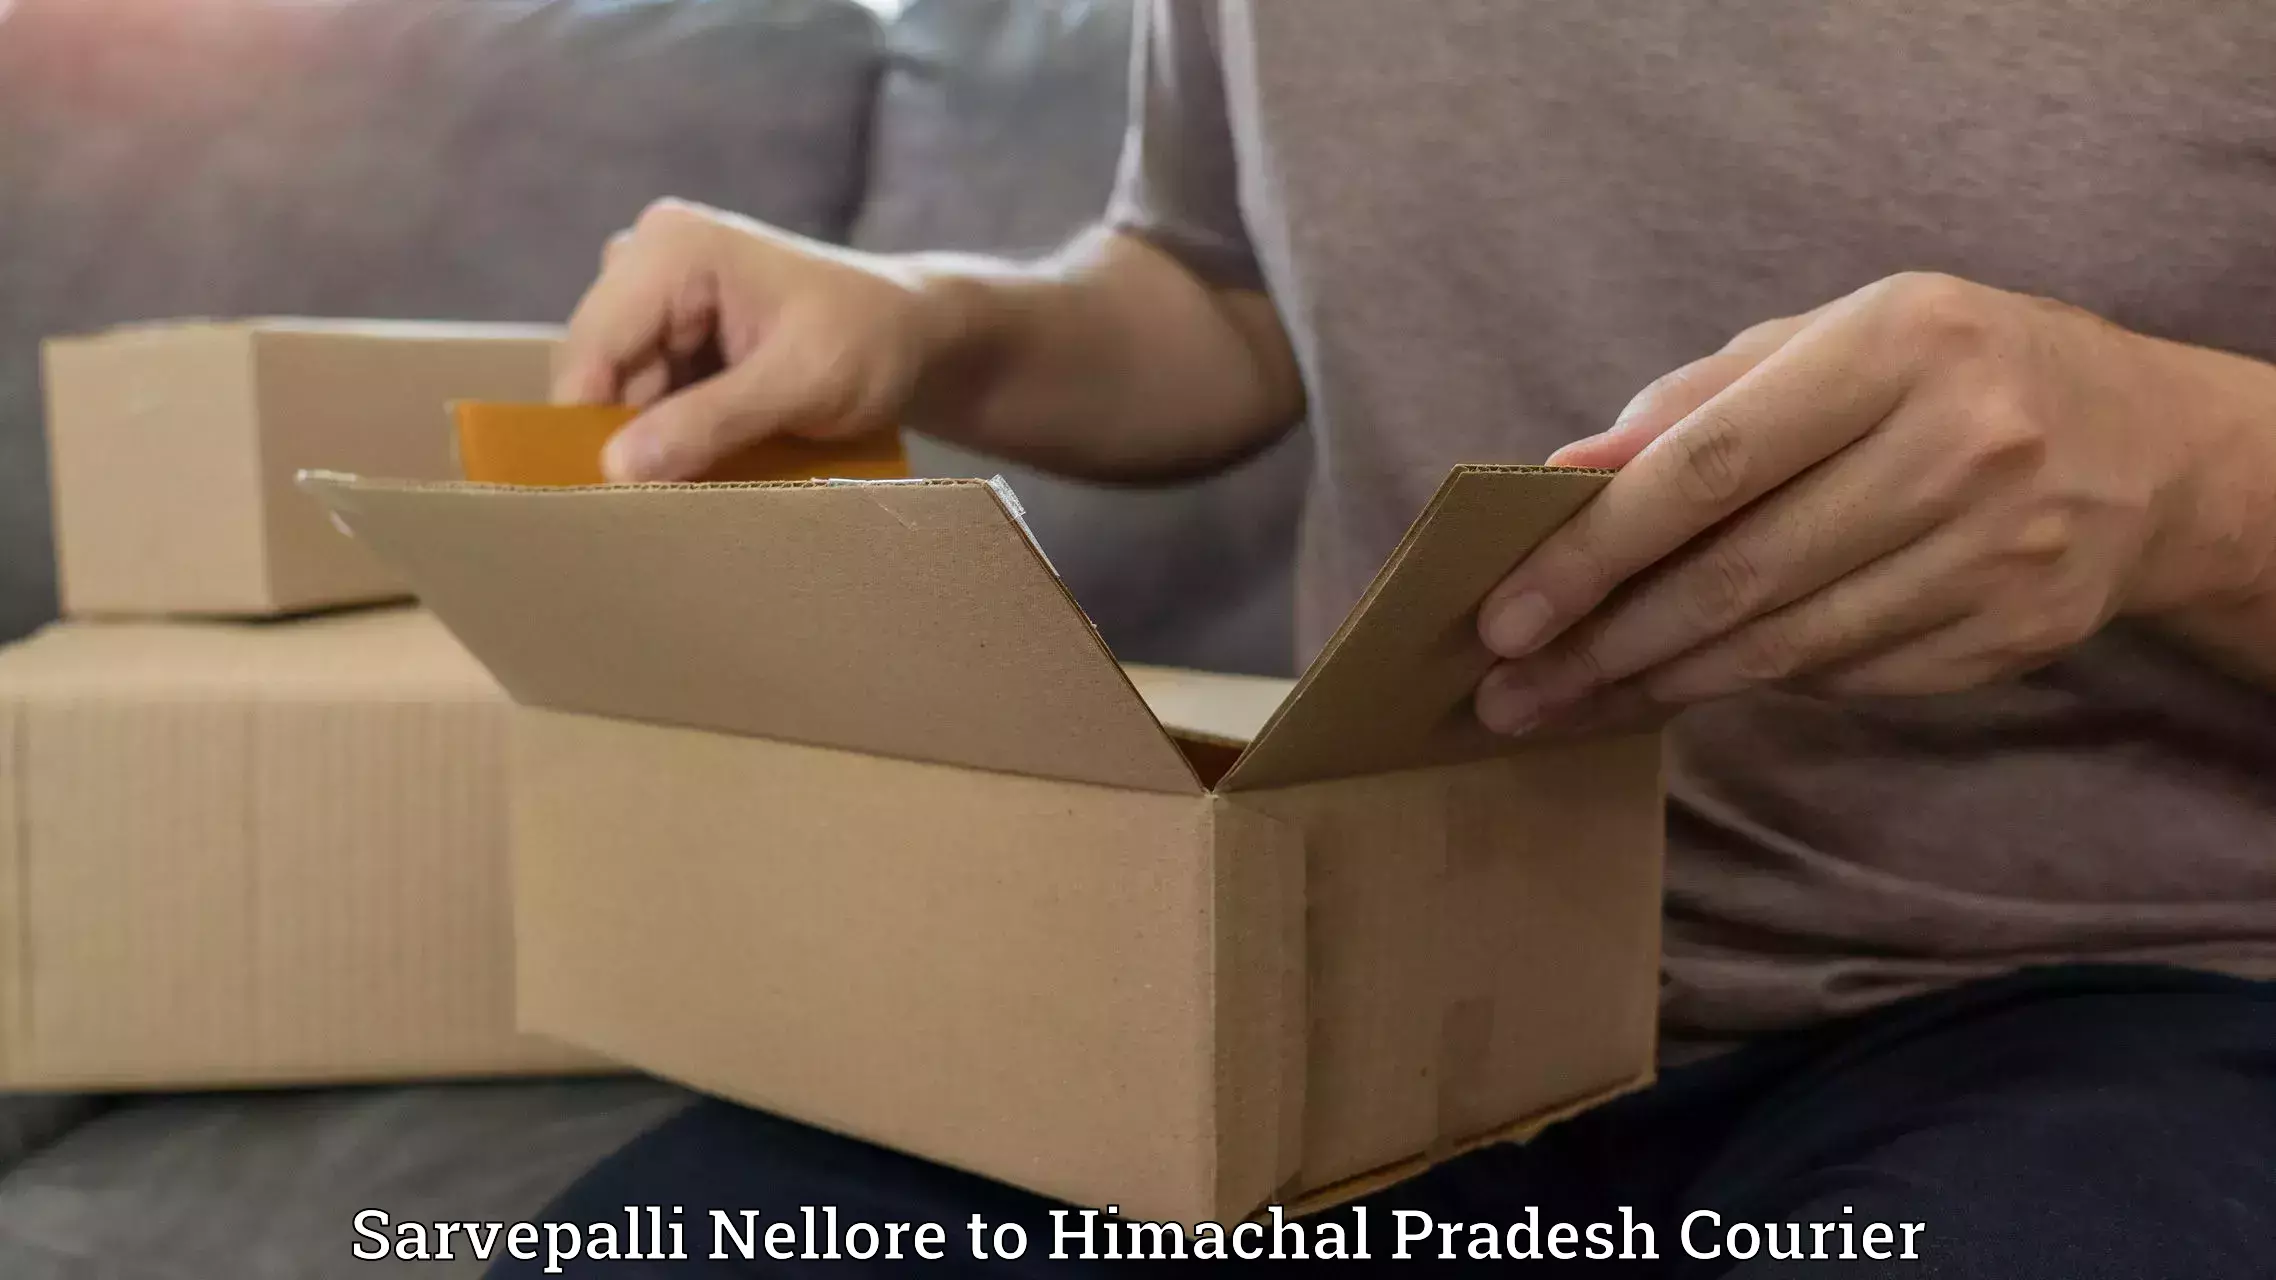 Bulk courier orders Sarvepalli Nellore to Lahaul and Spiti